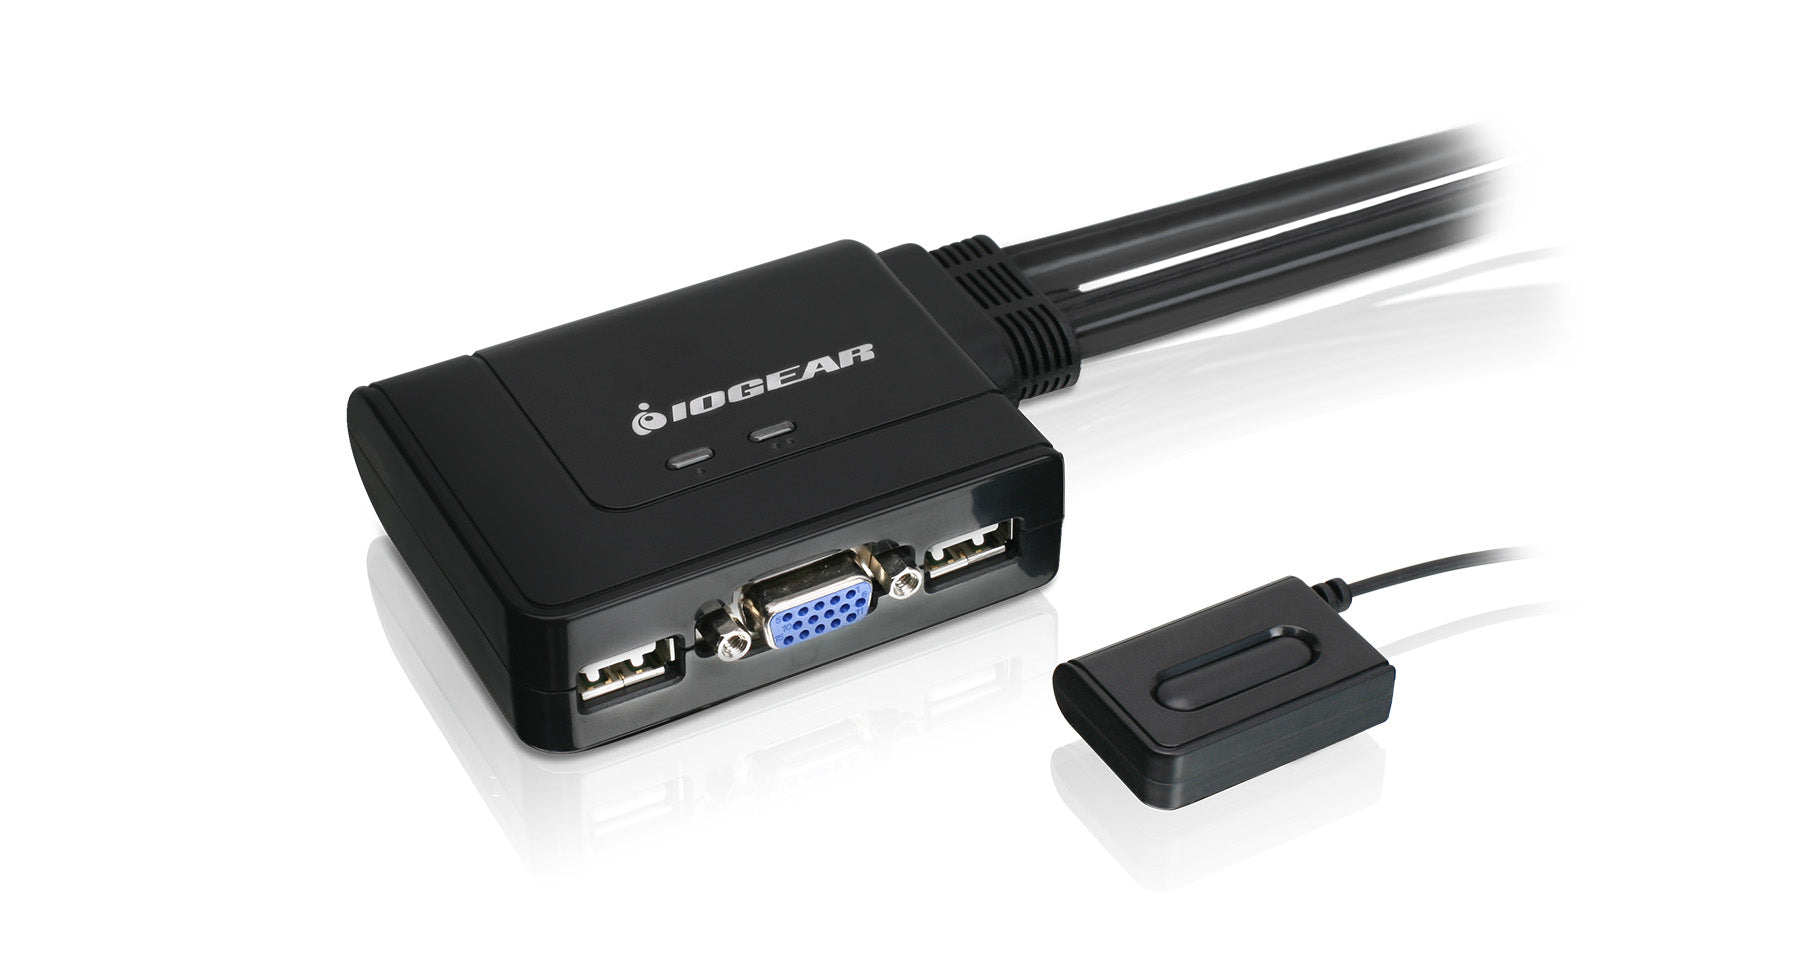 2-Port USB KVM Switch with Cables and Remote